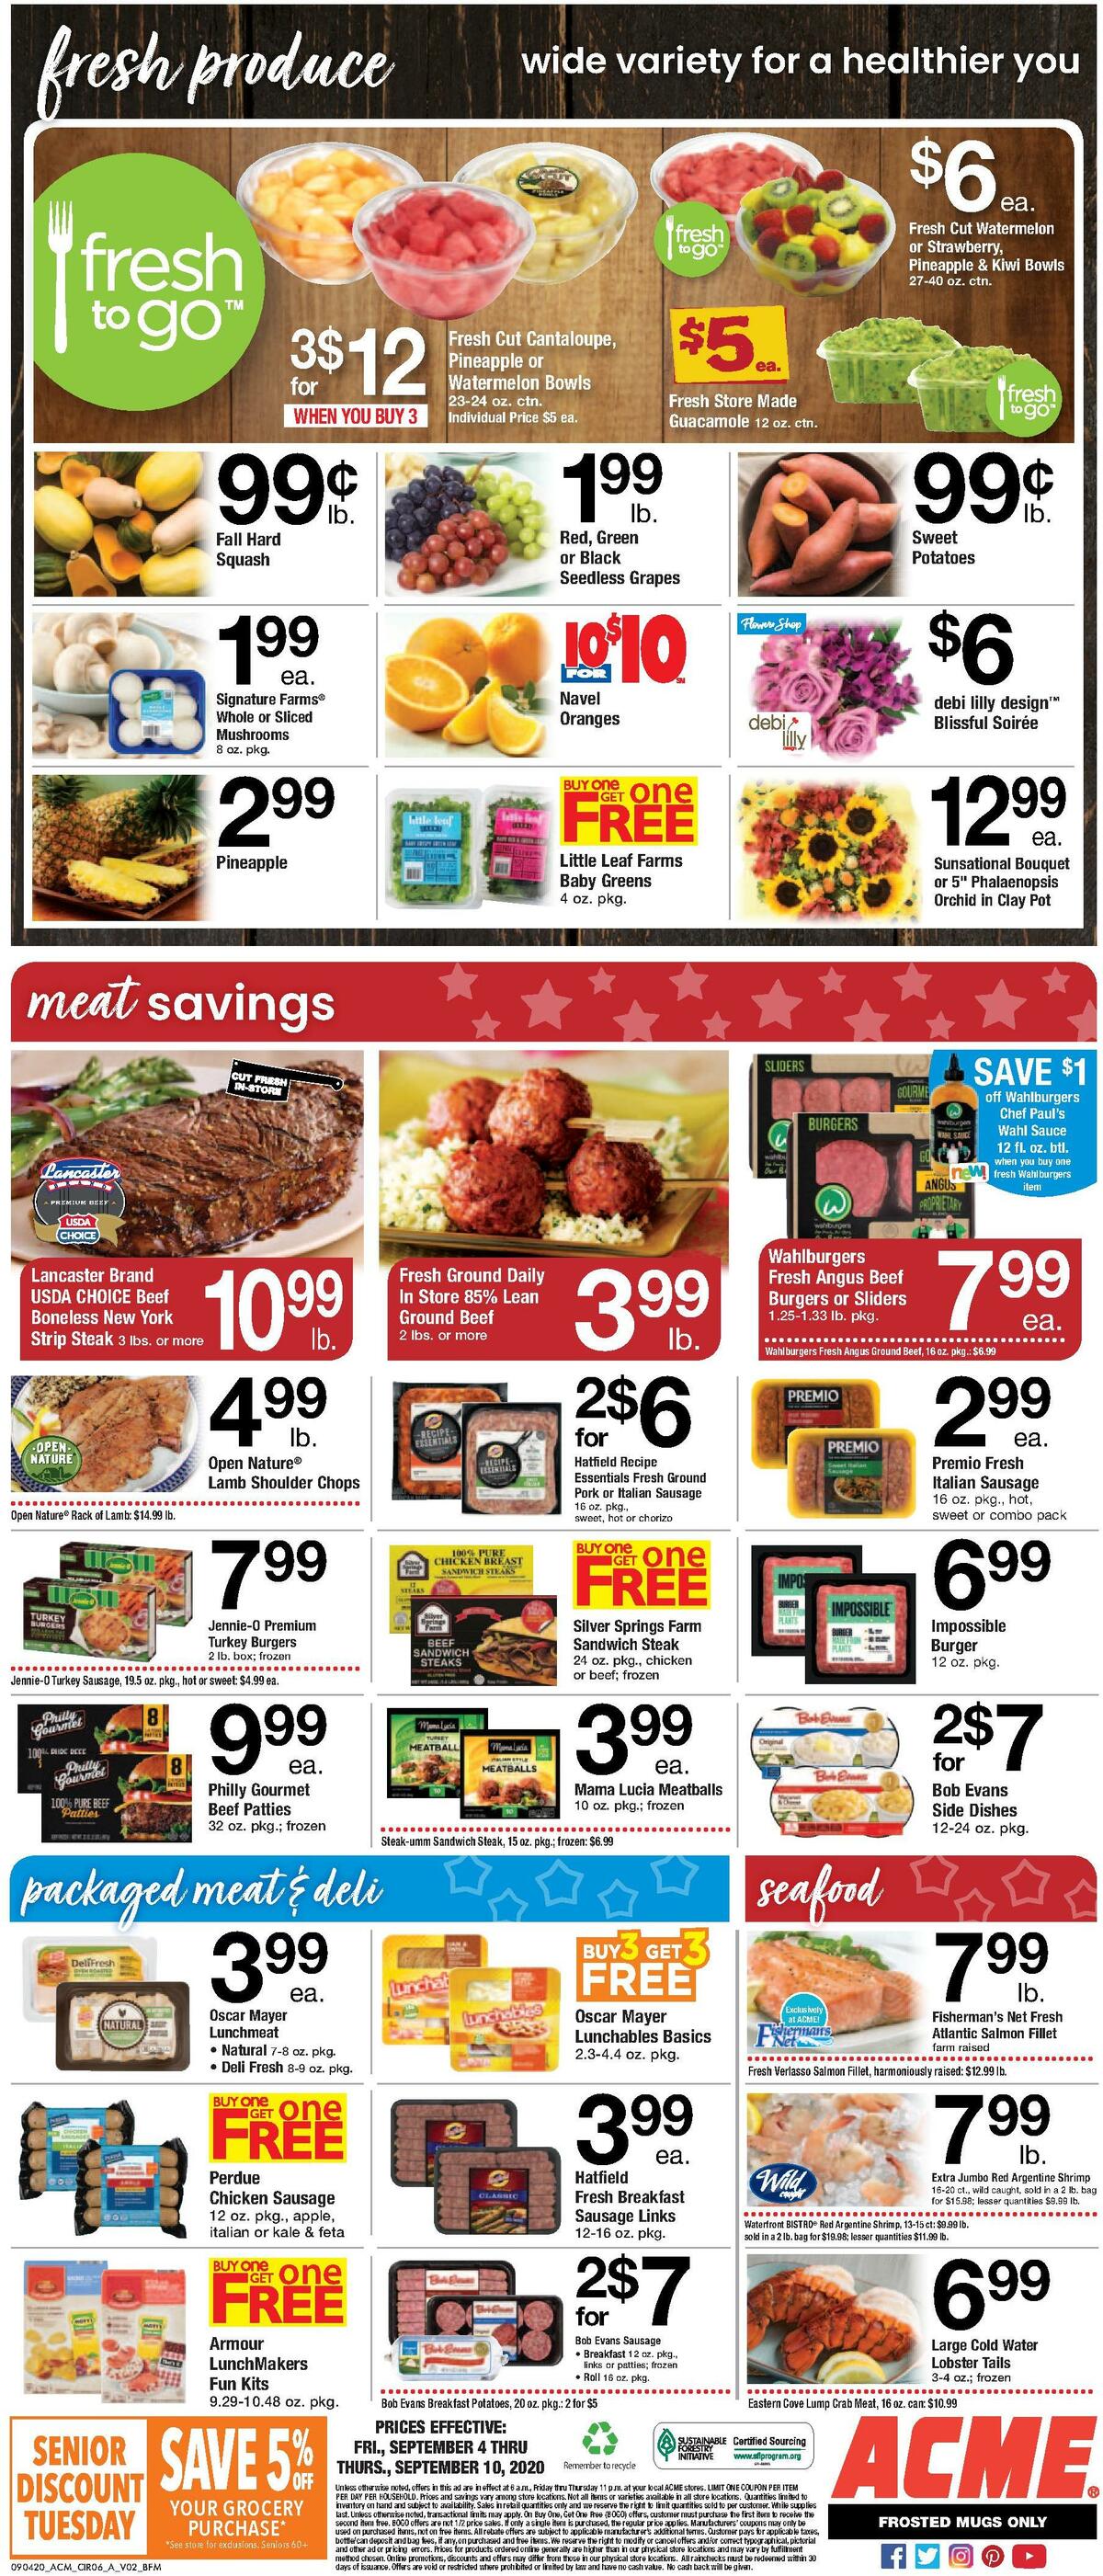 ACME Markets Weekly Ad from September 4